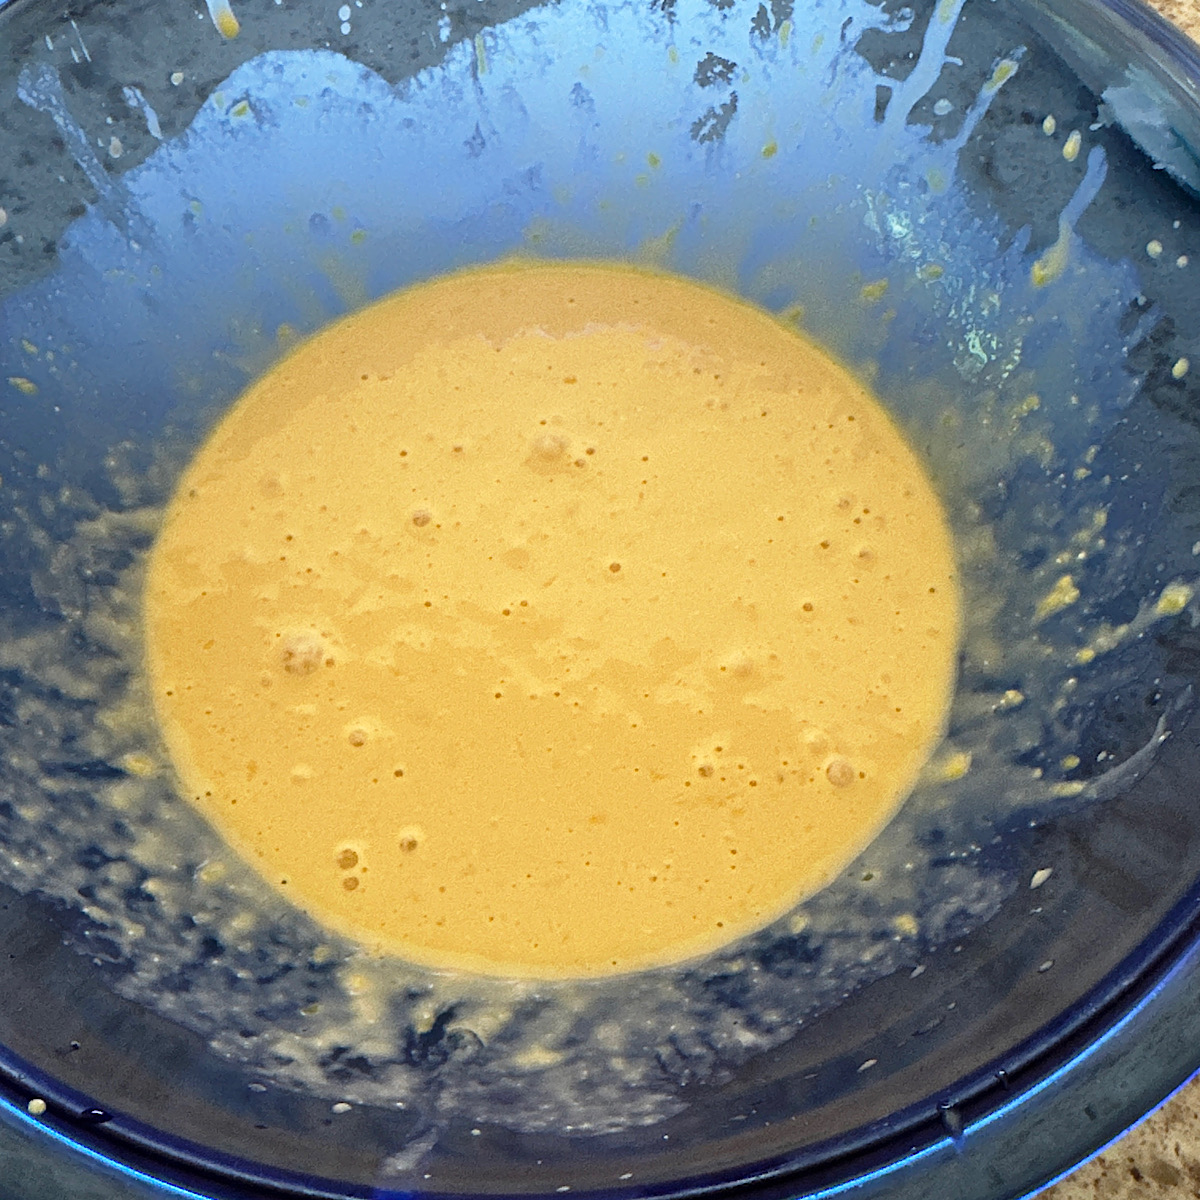 Wet ingredients (eggs, vanilla, sour cream and lemon juice) mixed together in a blue bowl.